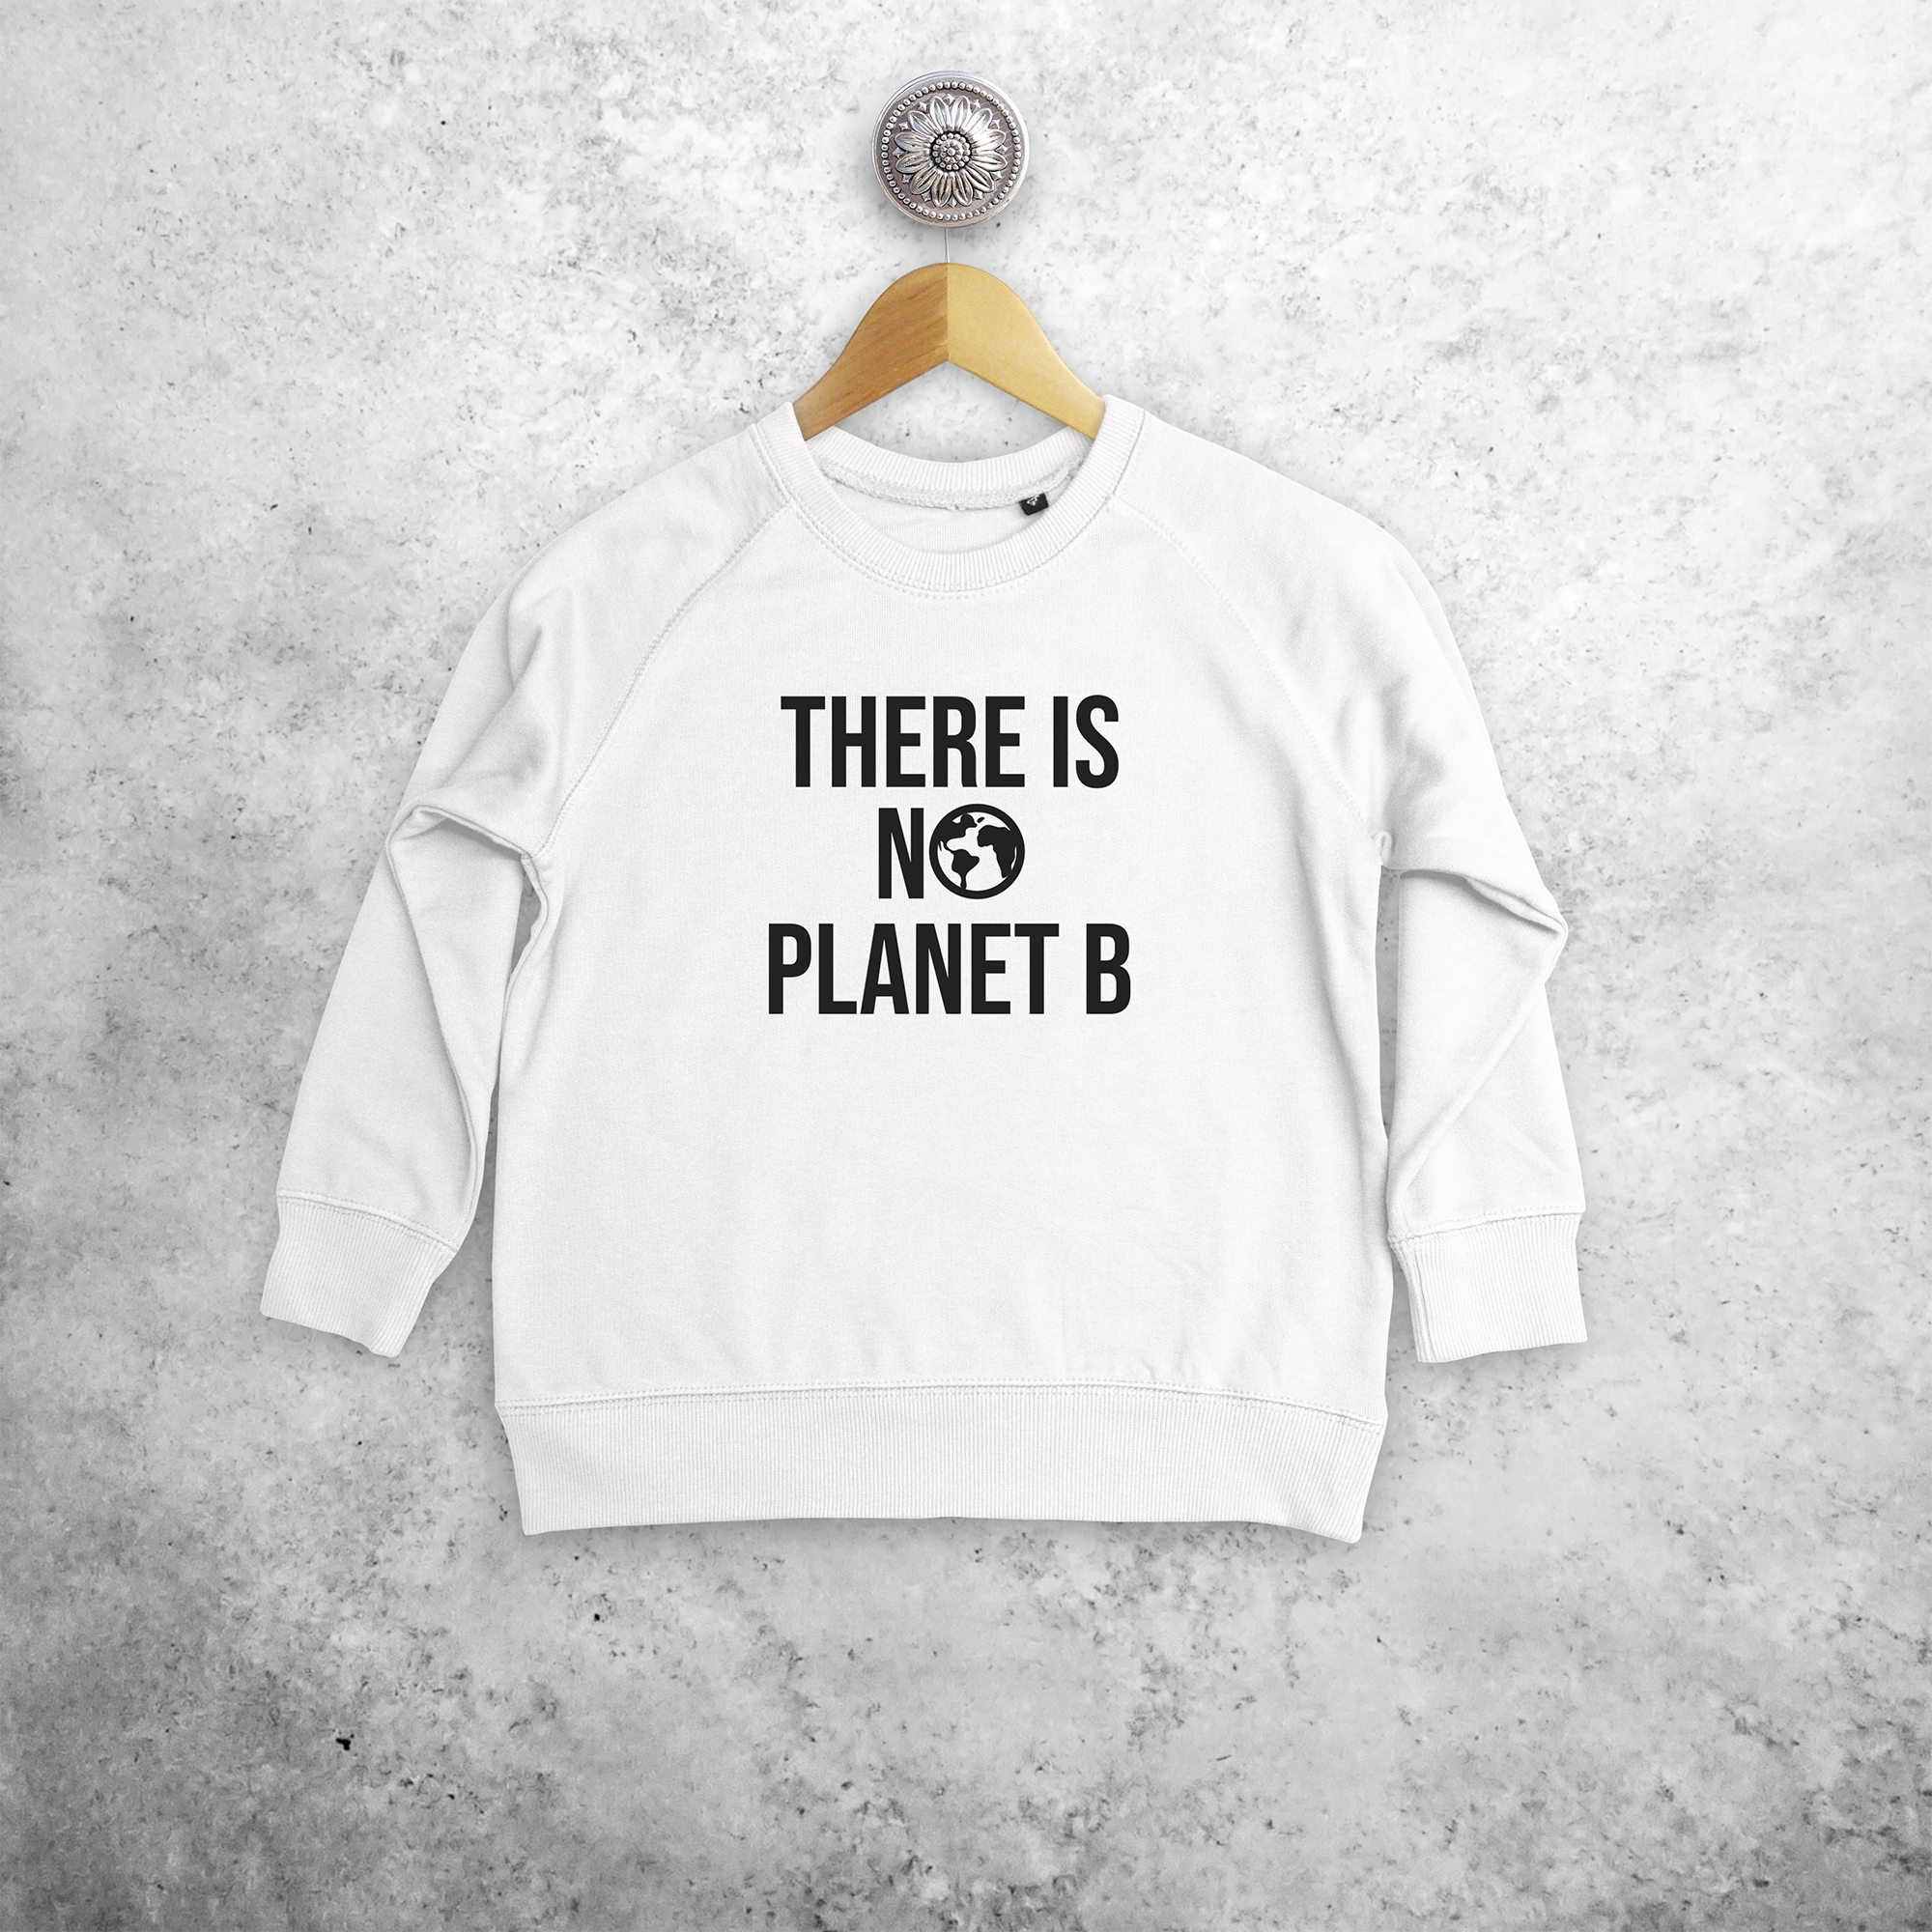 'There is no planet B' kids sweater